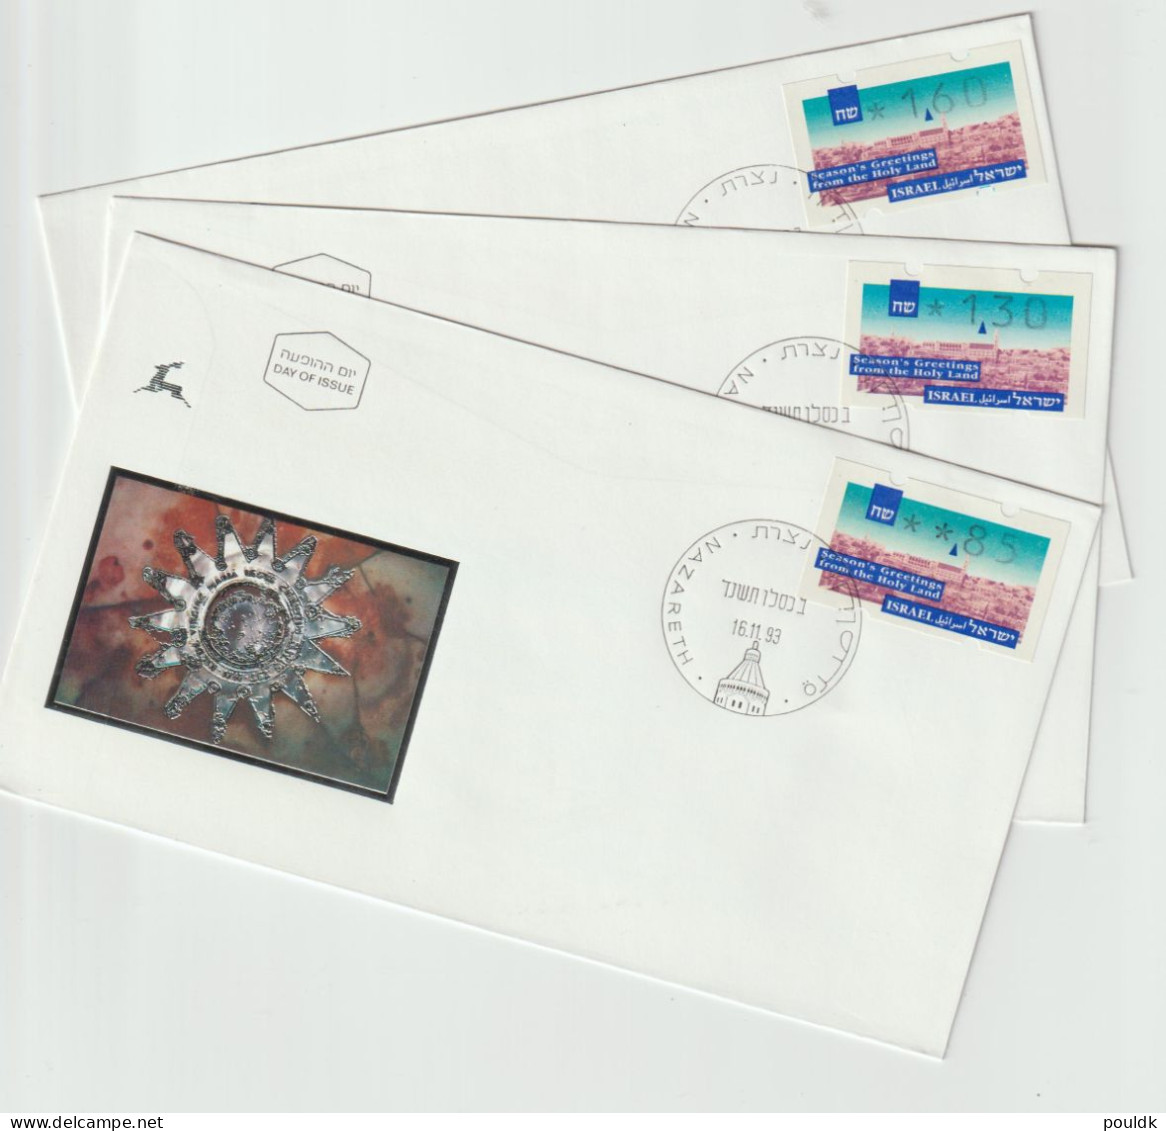 Israel 1993 ATM Christmas - Three FDC From Nazareth. Postal Weight 0,04 Kg. Please Read Sales Conditions Under Image Of - Viñetas De Franqueo [ATM]